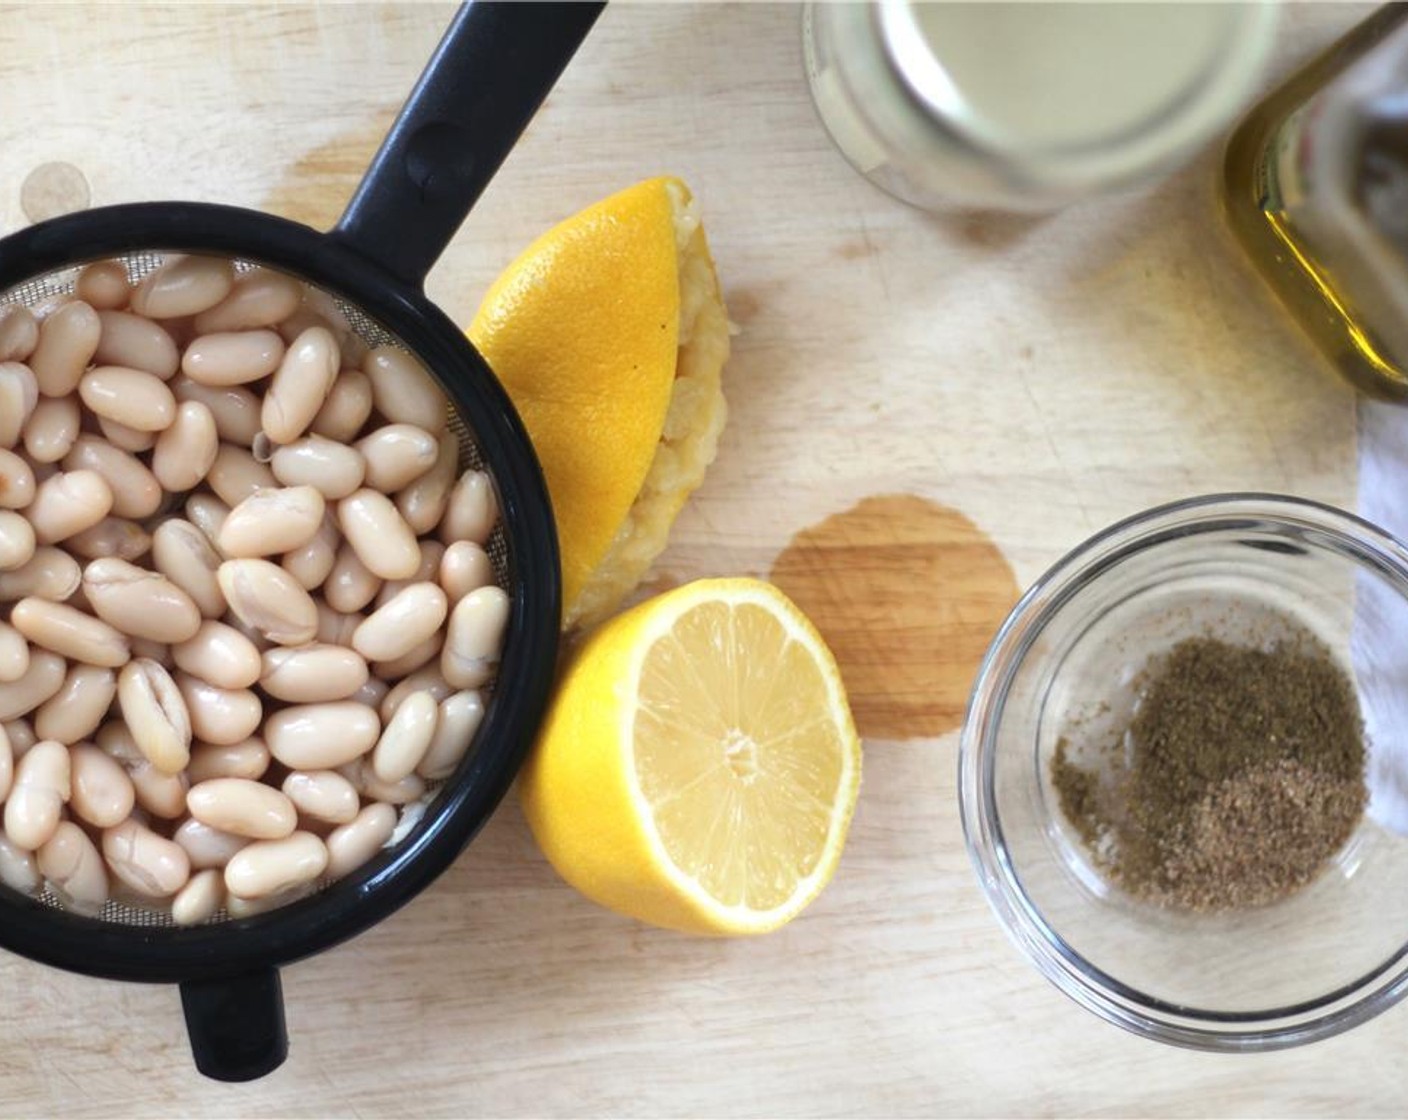 step 4 In a food processor or blender, blend together the Canned Cannellini White Kidney Beans (1 cup), the juice from Lemon (1/8), Dill Pickle (1), Pickle Juice (1 Tbsp), Greek Yogurt (2 Tbsp), Tahini (2 Tbsp), Olive Oil (2 Tbsp), Ground Cumin (1 tsp), and Ground Coriander (1 tsp).